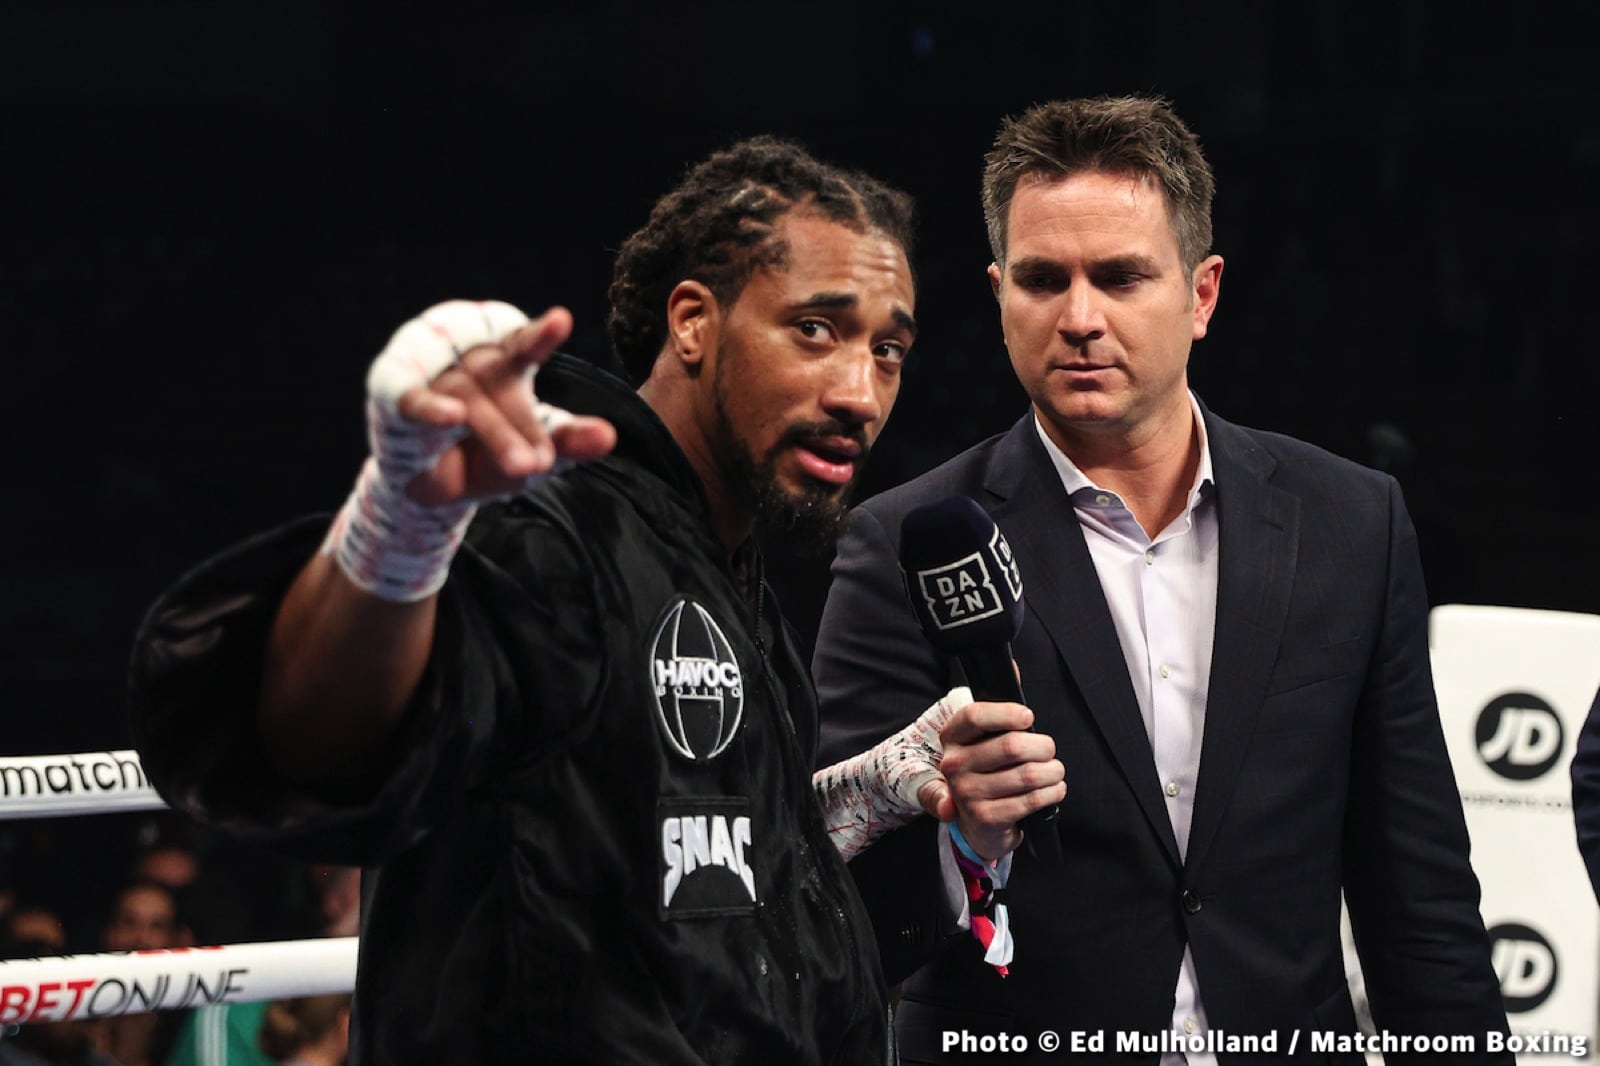 Demetrius Andrade vs. Jason Quigley - Live results from New Hampshire